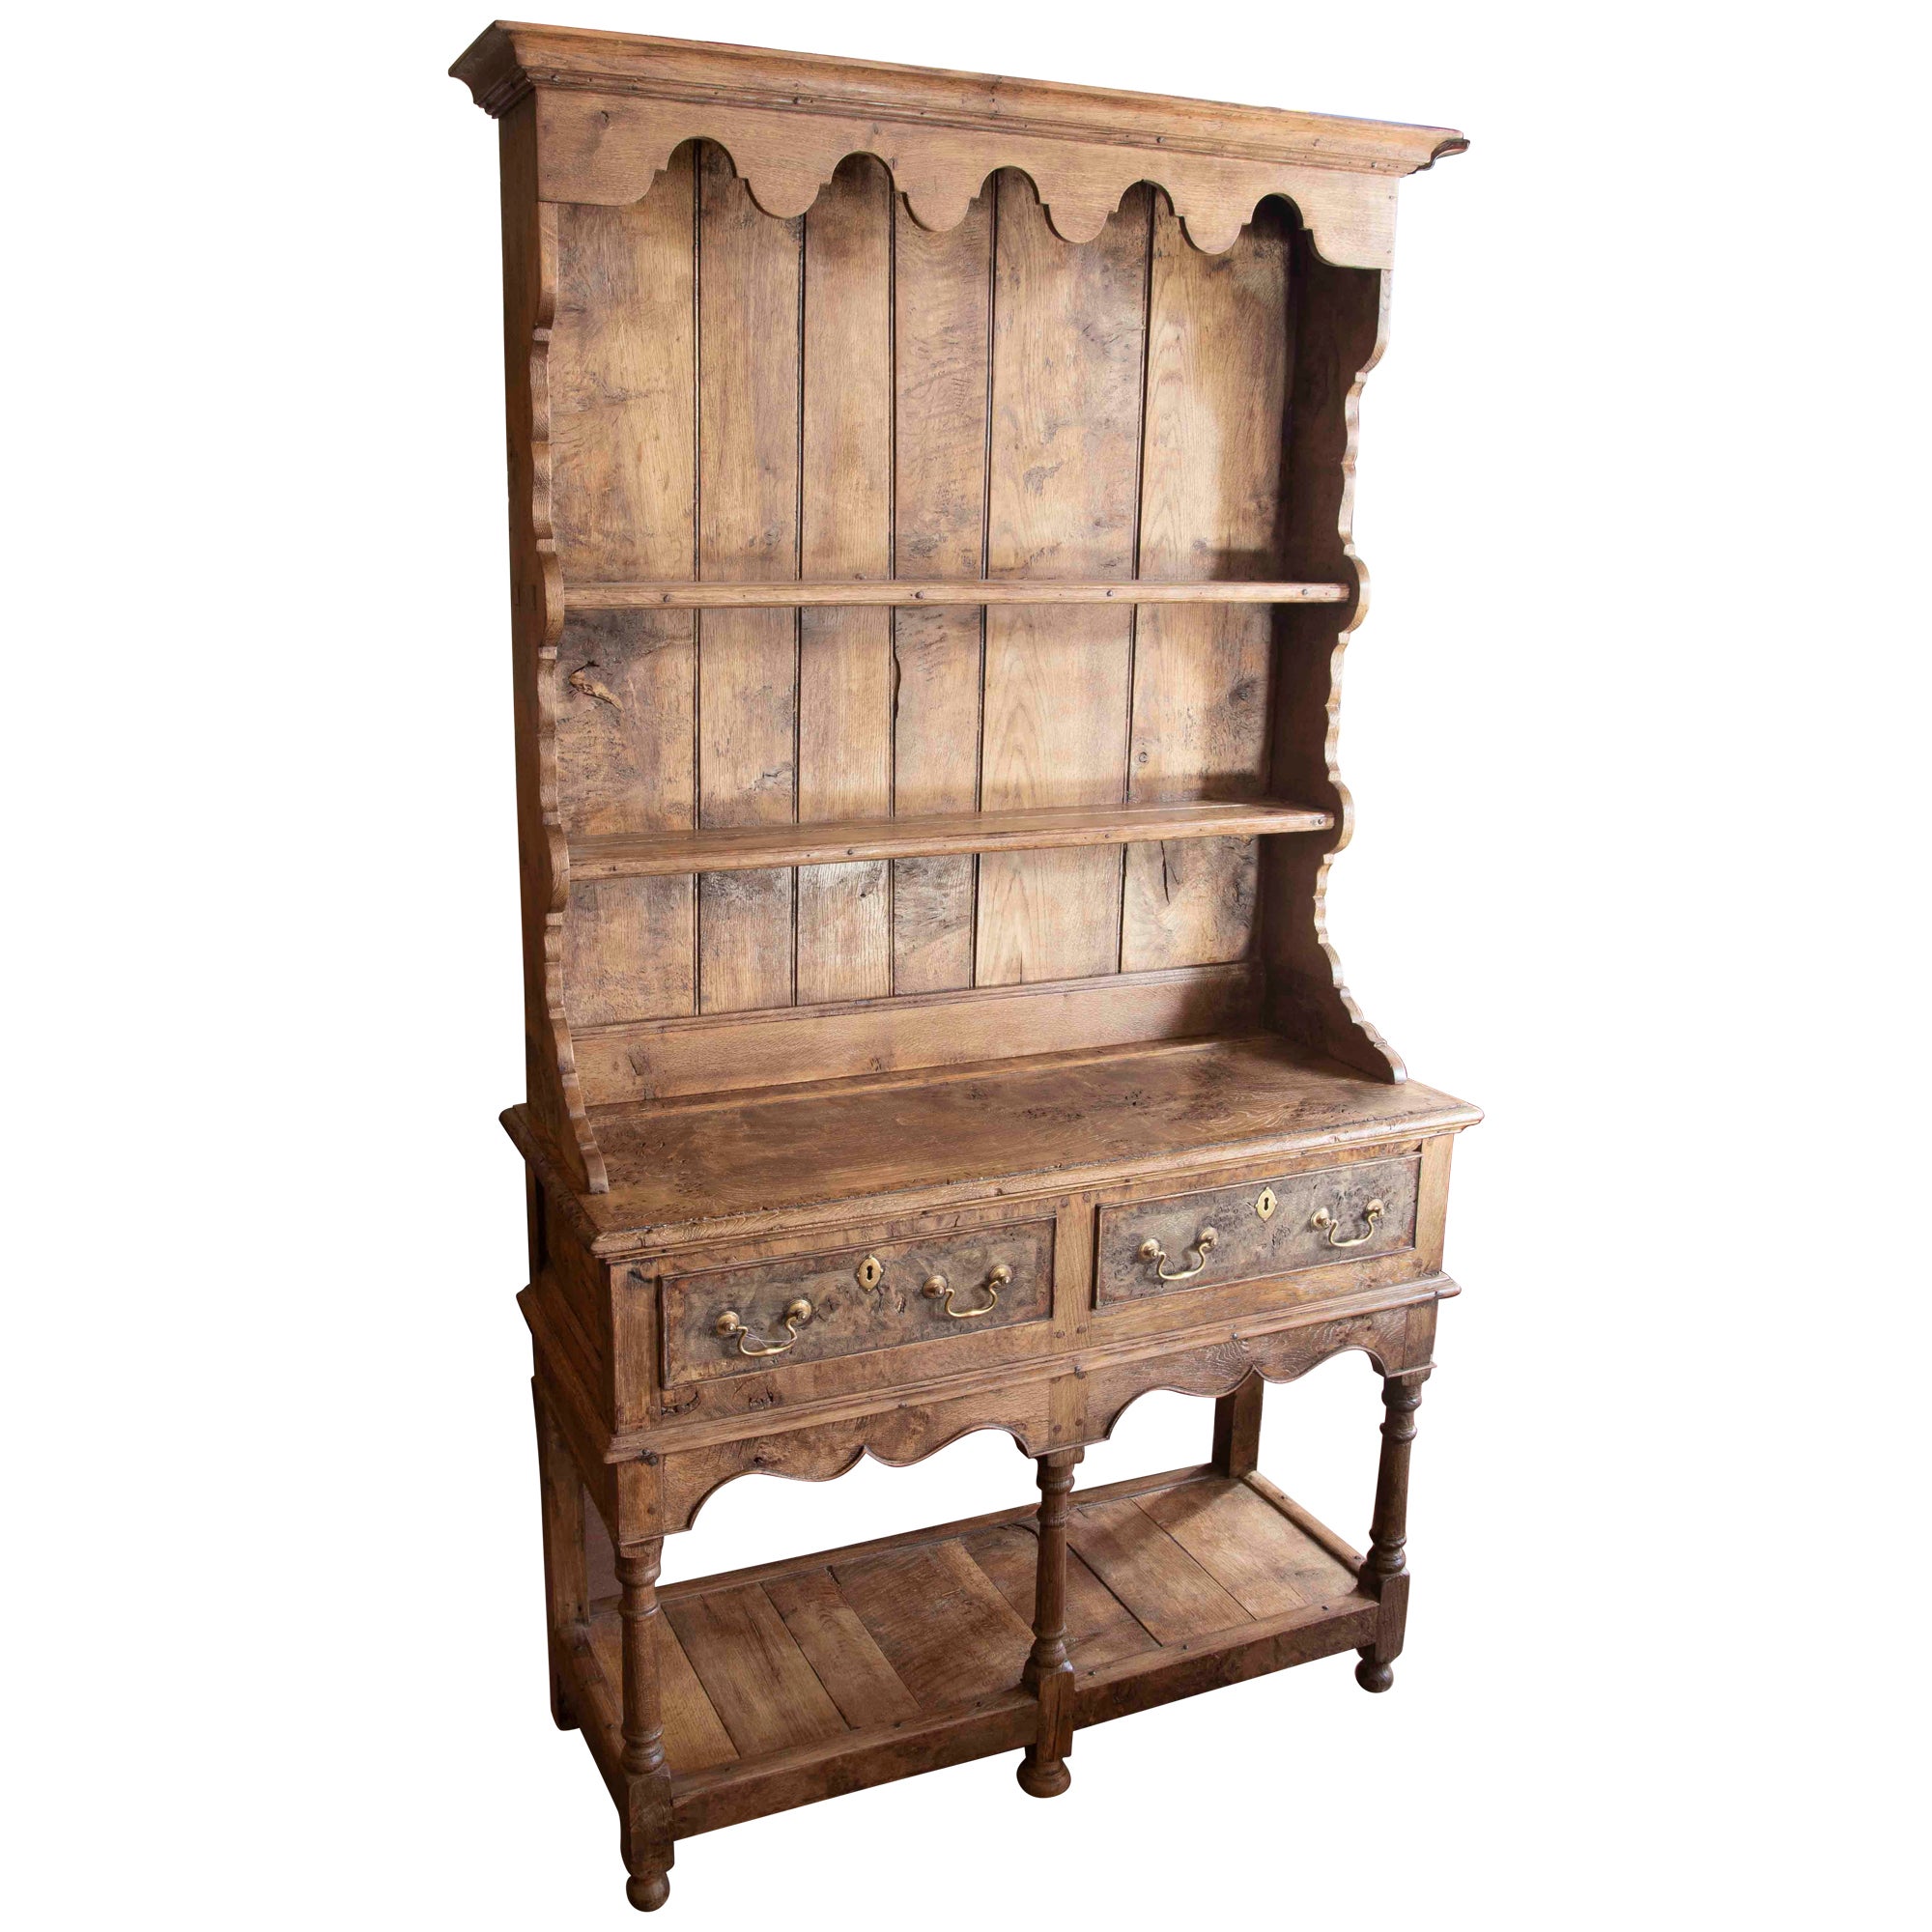 19th Century English Wooden Plateroom with Drawers and Bronze Handles For Sale